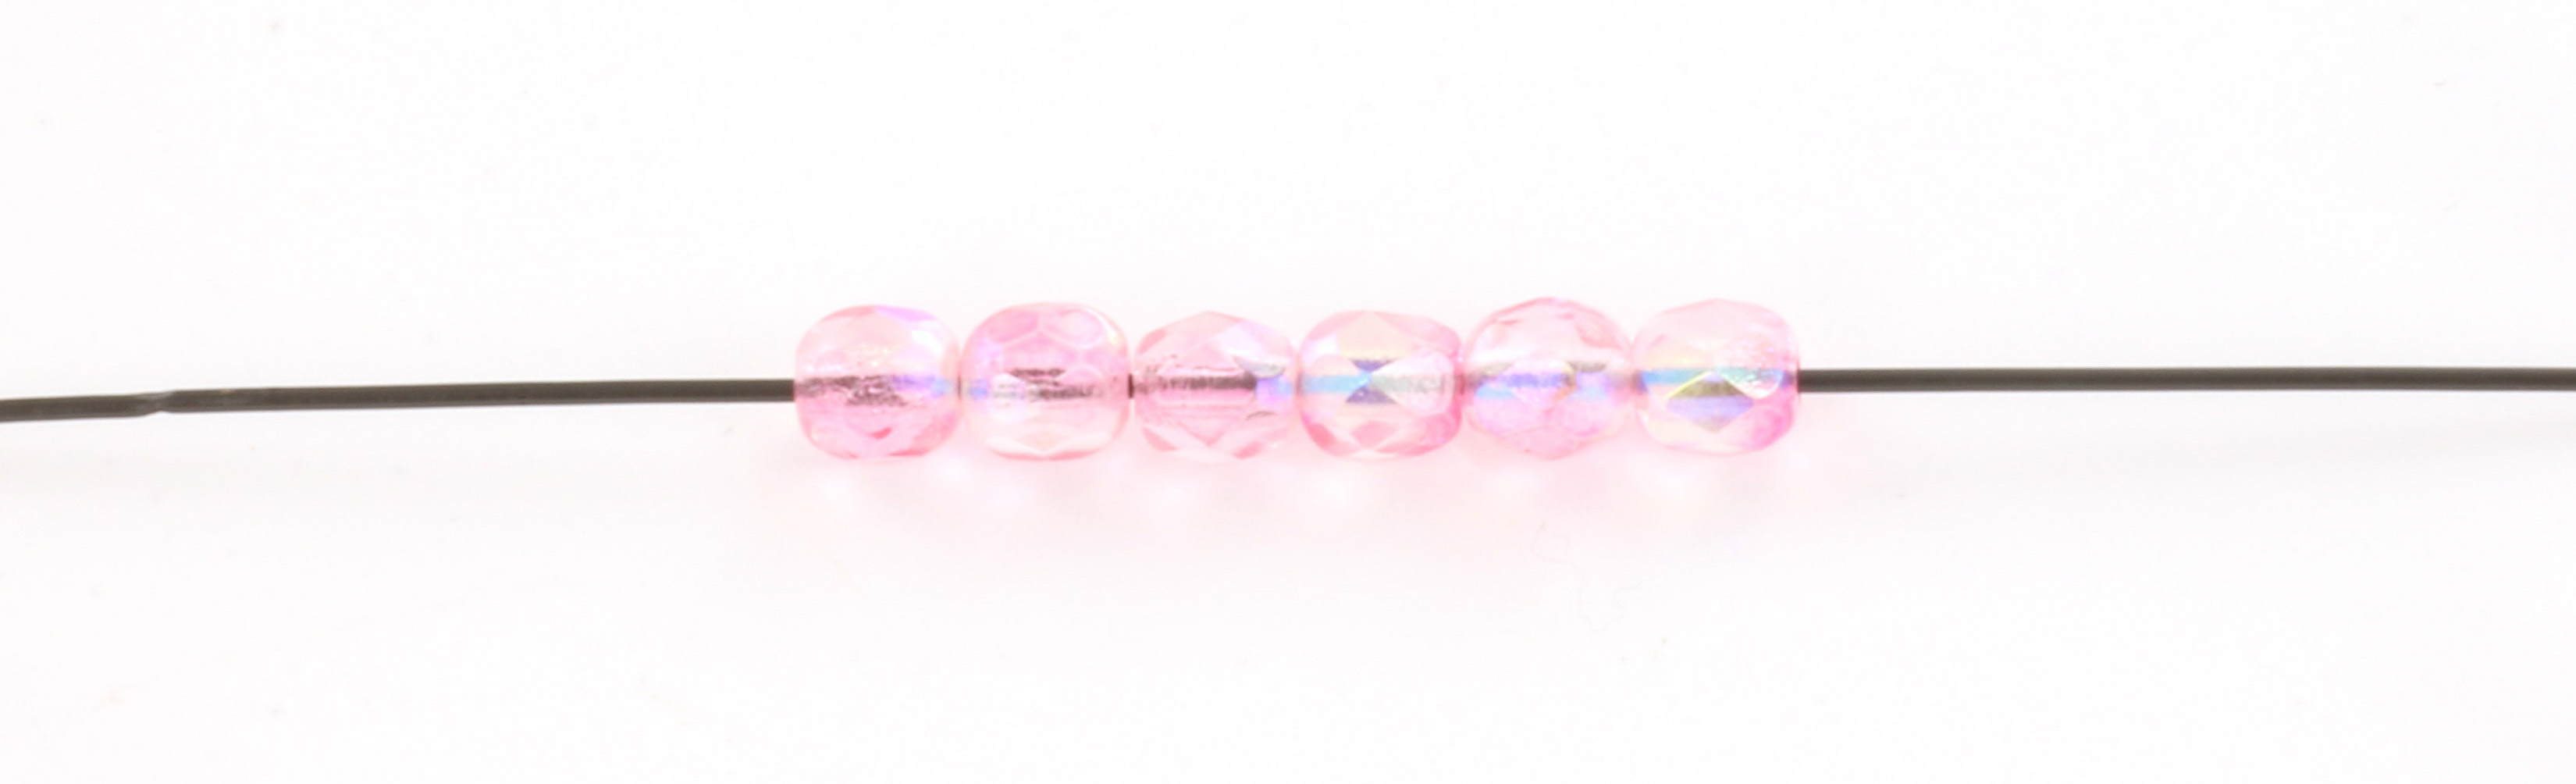 Extra foto's Tsjechisch facet rond 4 mm - milky pink ab